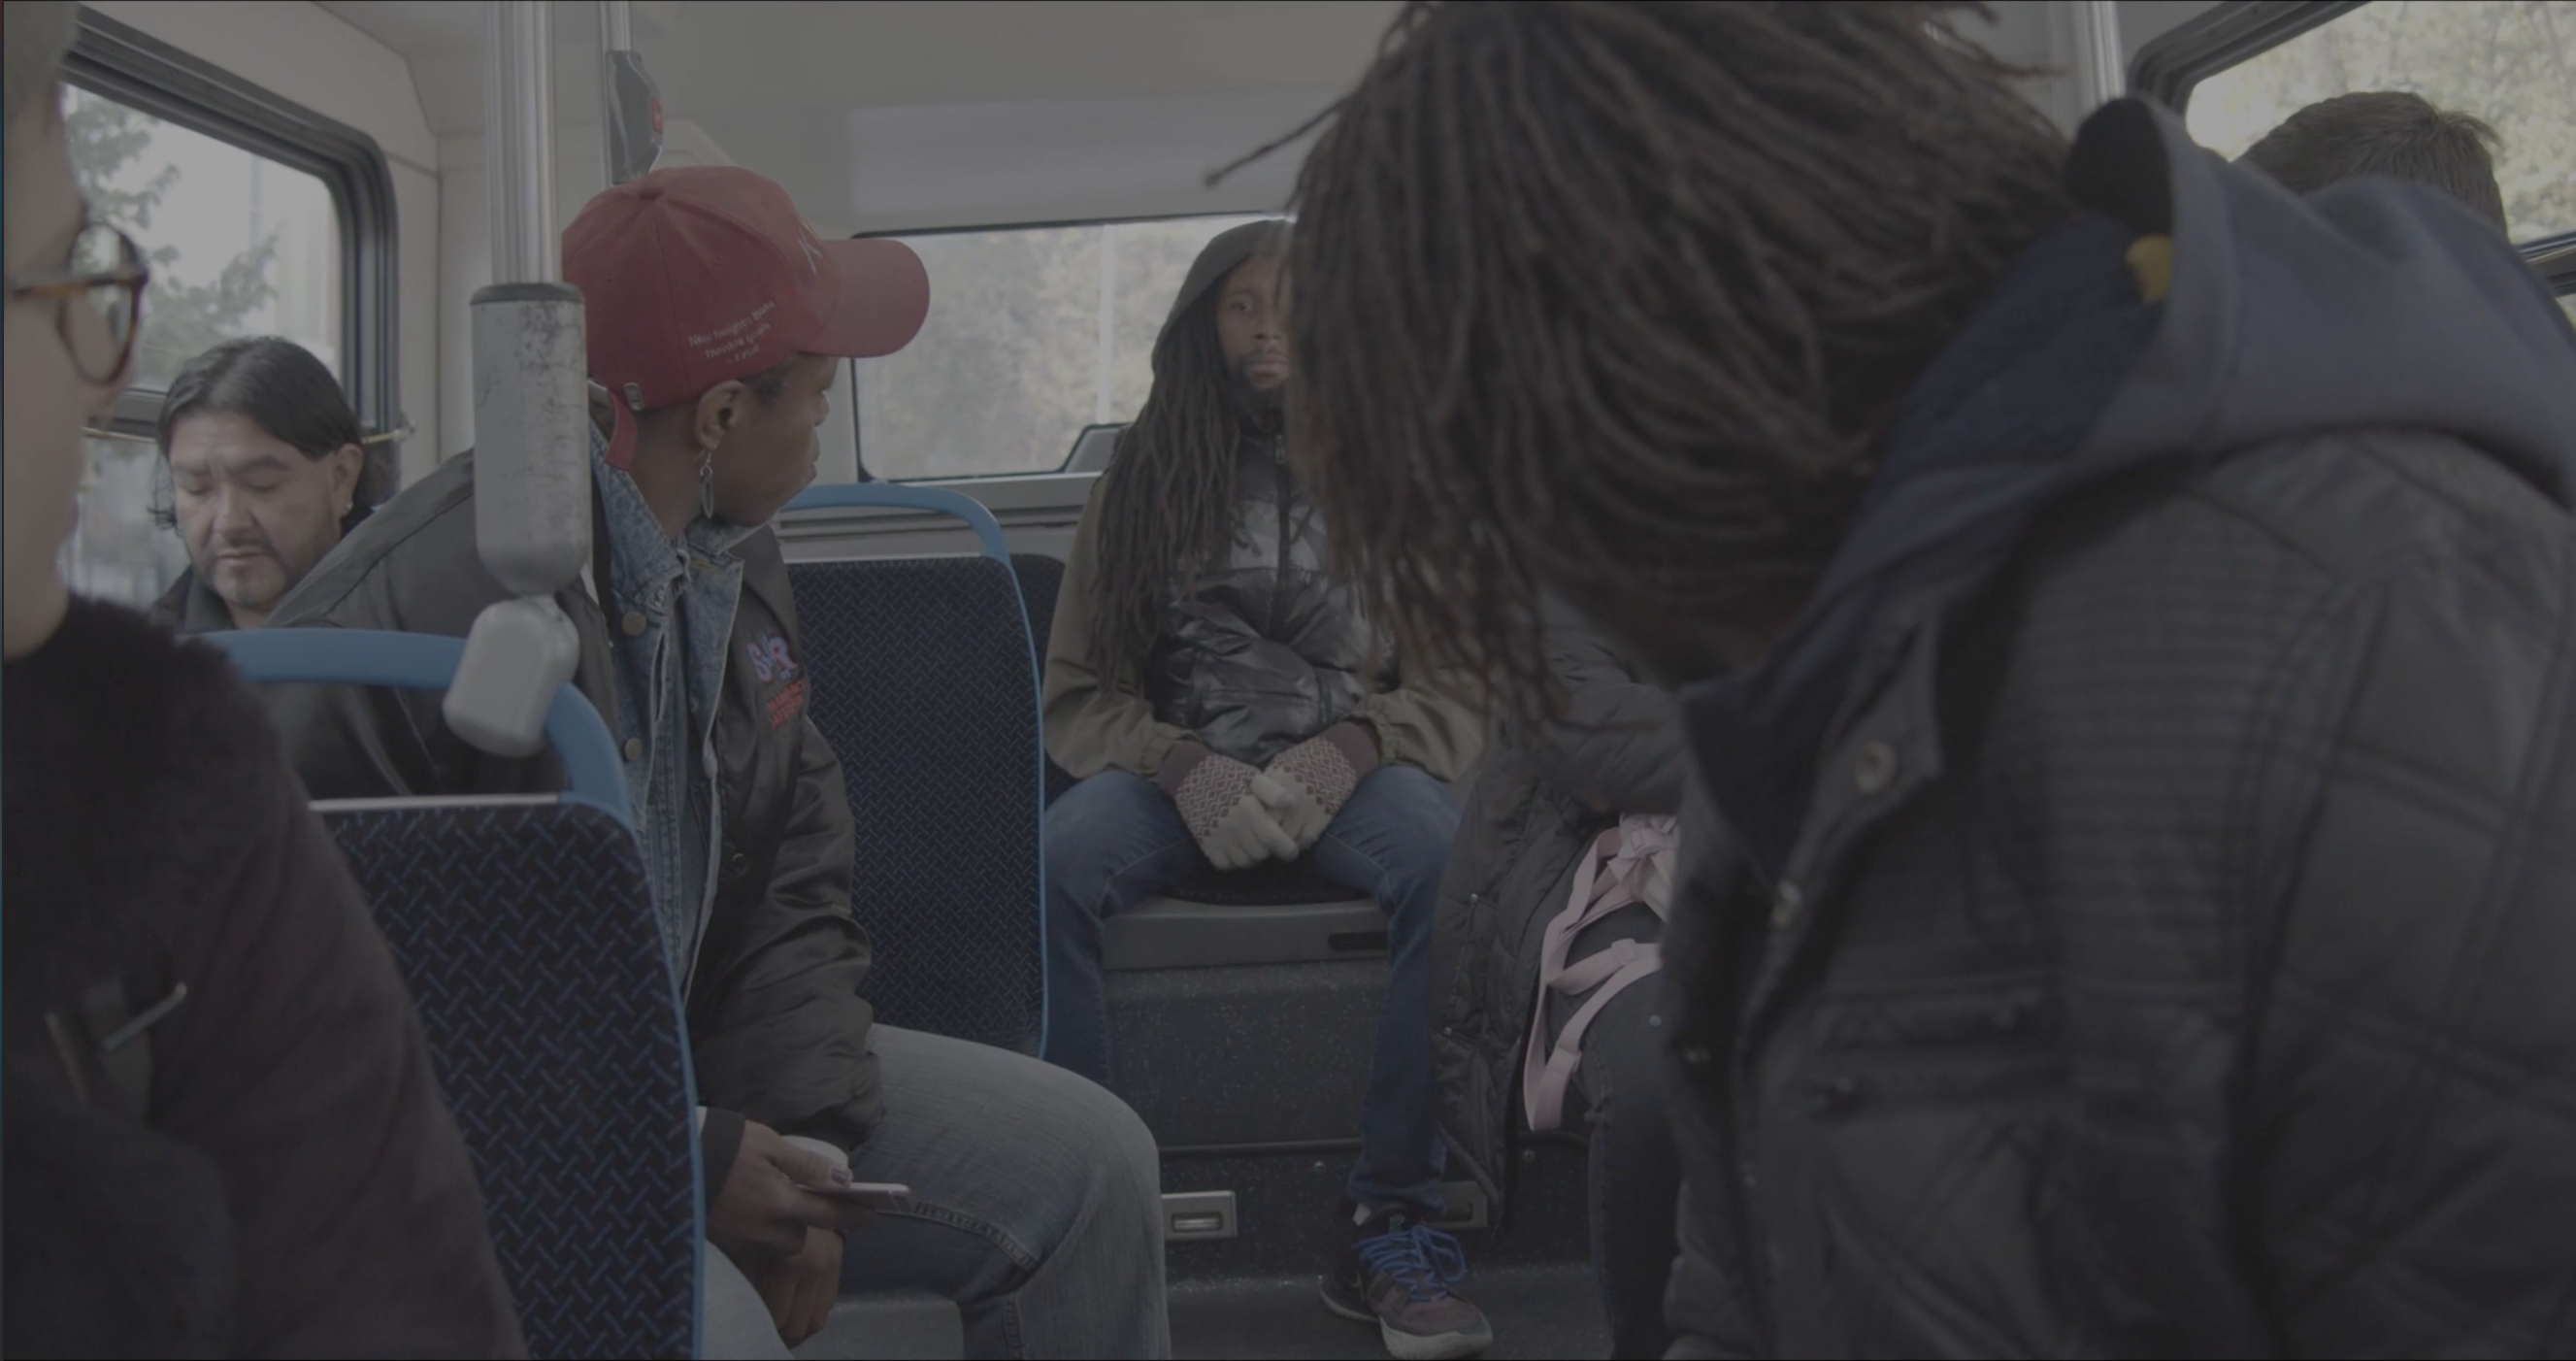  An ethnically diverse group of passengers are sitting on a bus, with their body partially turned around and looking at a young Black man, sitting down in the middle of the last row of seats. Everyone in the scene is wearing denim and "everyday" clothes. 